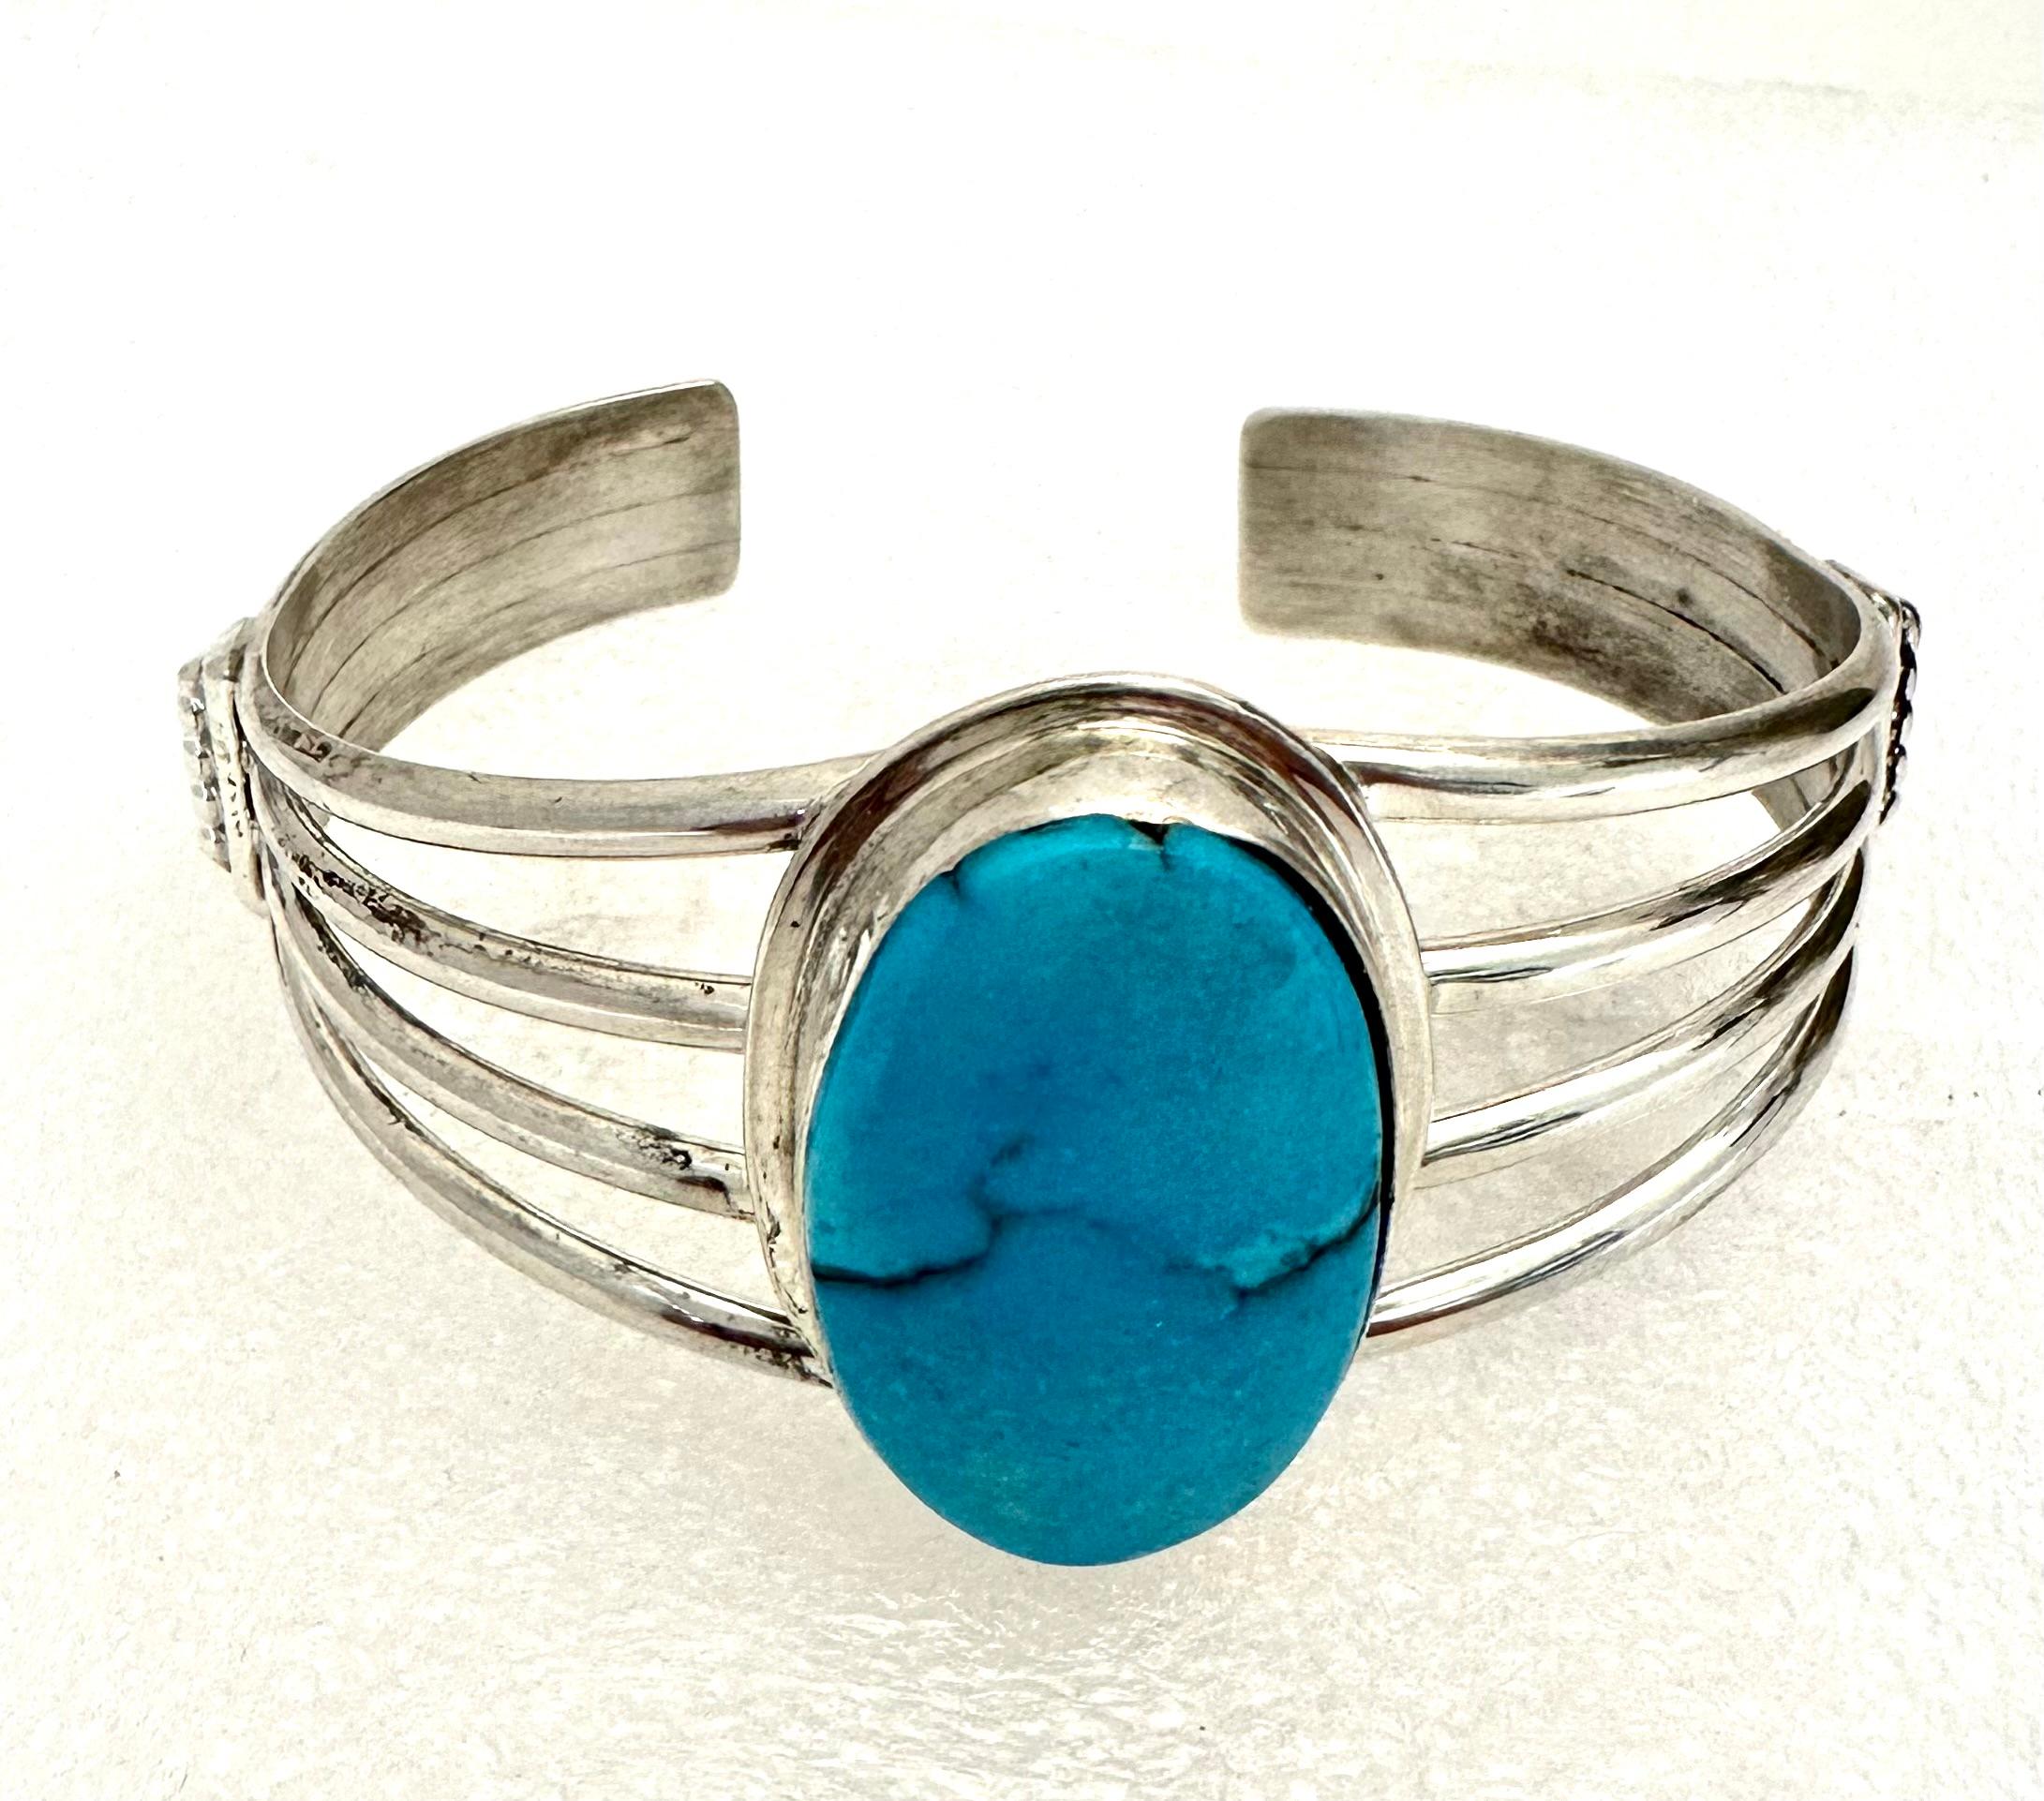 Sterling Silver .925 18mm x 29mm Oval Sleeping Beauty Turquoise Cuff Bracelet

Turquoise, a blend of the color blue and the color green, has some of the same cool and calming attributes. The color turquoise is associated with meanings of refreshing,